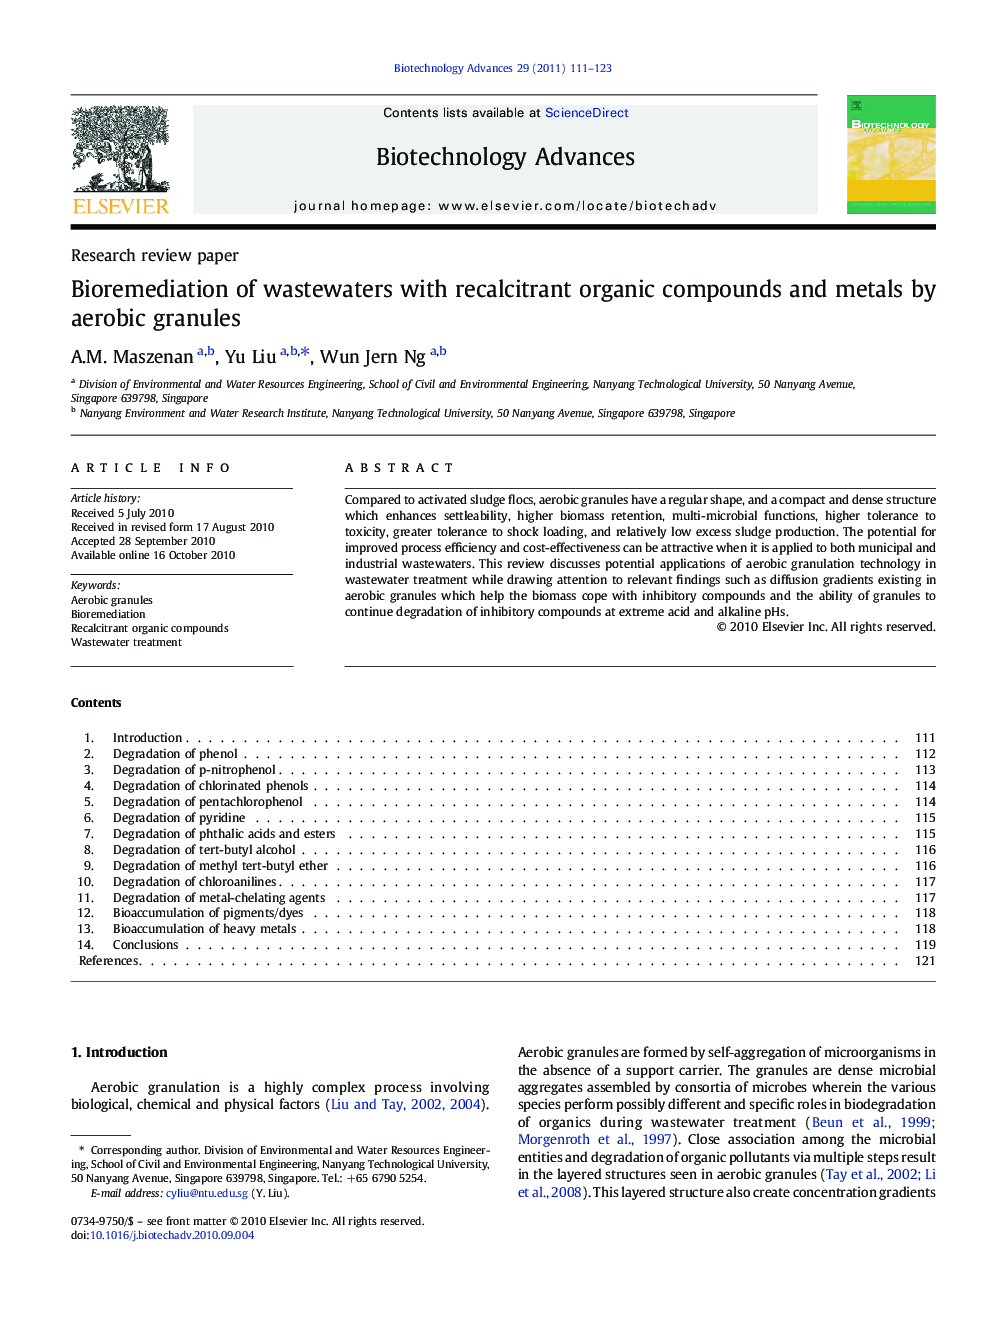 Bioremediation of wastewaters with recalcitrant organic compounds and metals by aerobic granules